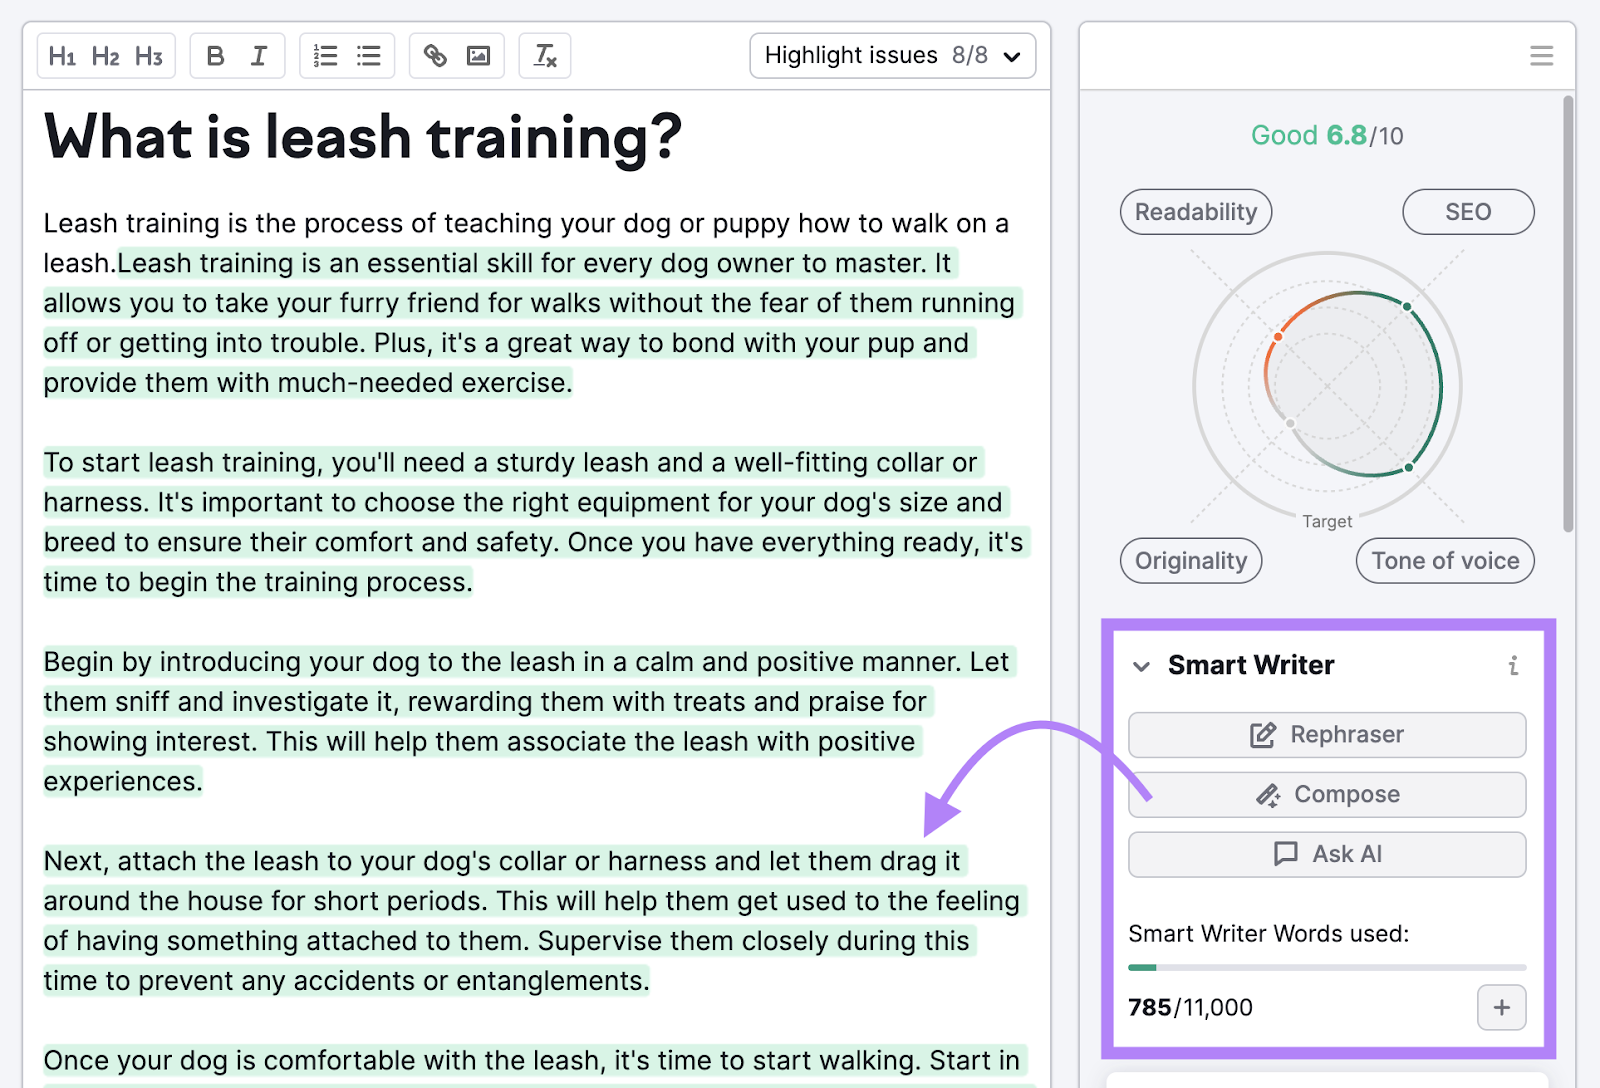 An nonfiction  connected  "What is leash training" connected  the left-hand broadside  and "Smart Writer" widget connected  the right-hand broadside  successful  SEO Writing Assistant